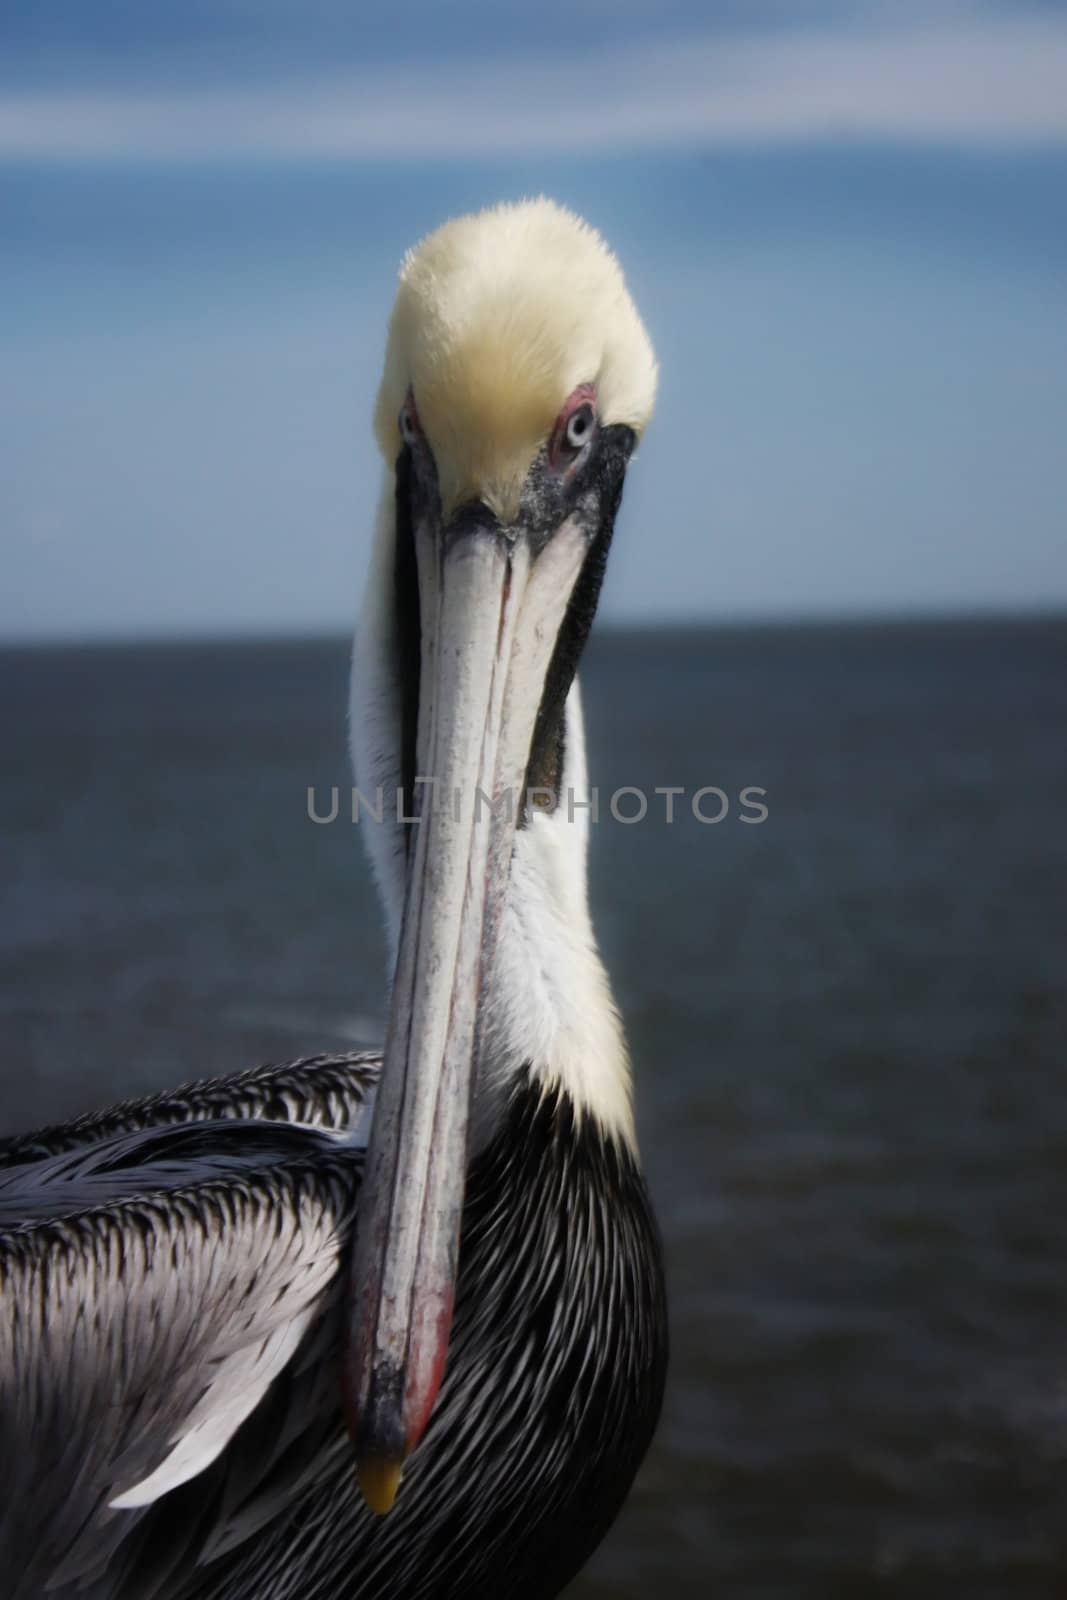 cloes up of a mad pelican